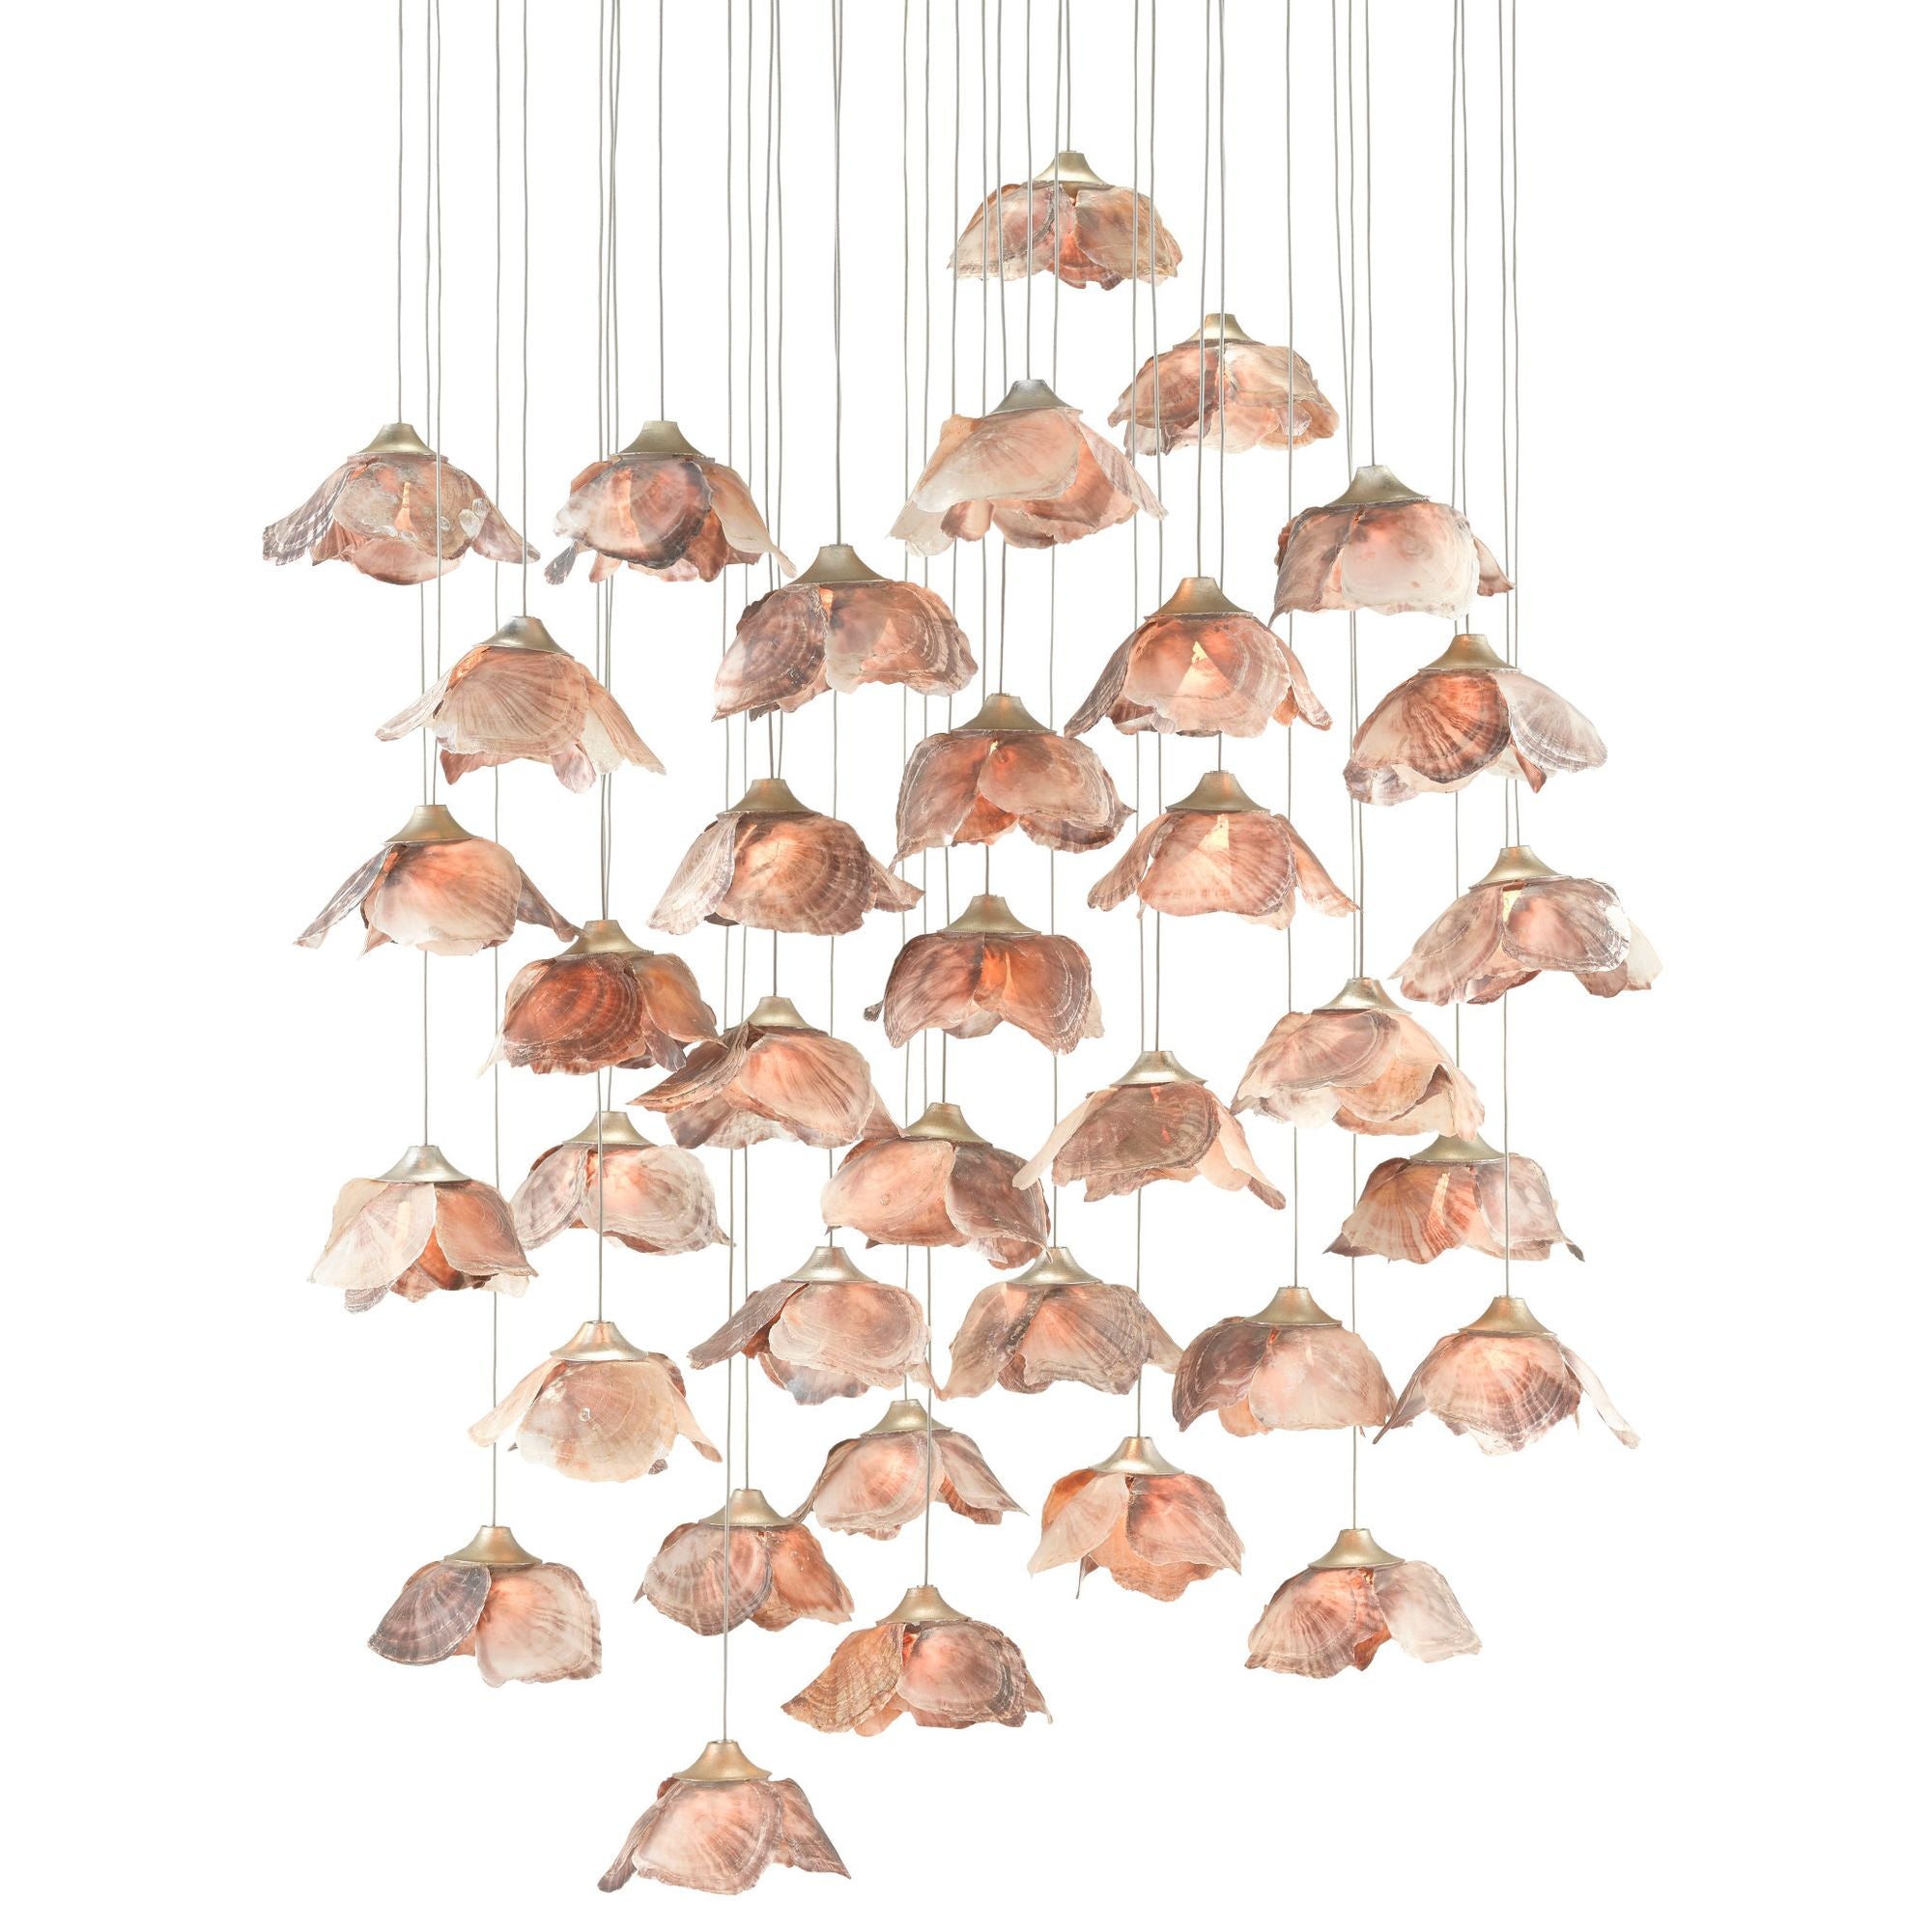 Catrice 36-Light Round Multi-Drop Pendant - Painted Silver/Contemporary Silver Leaf/Natural Shell